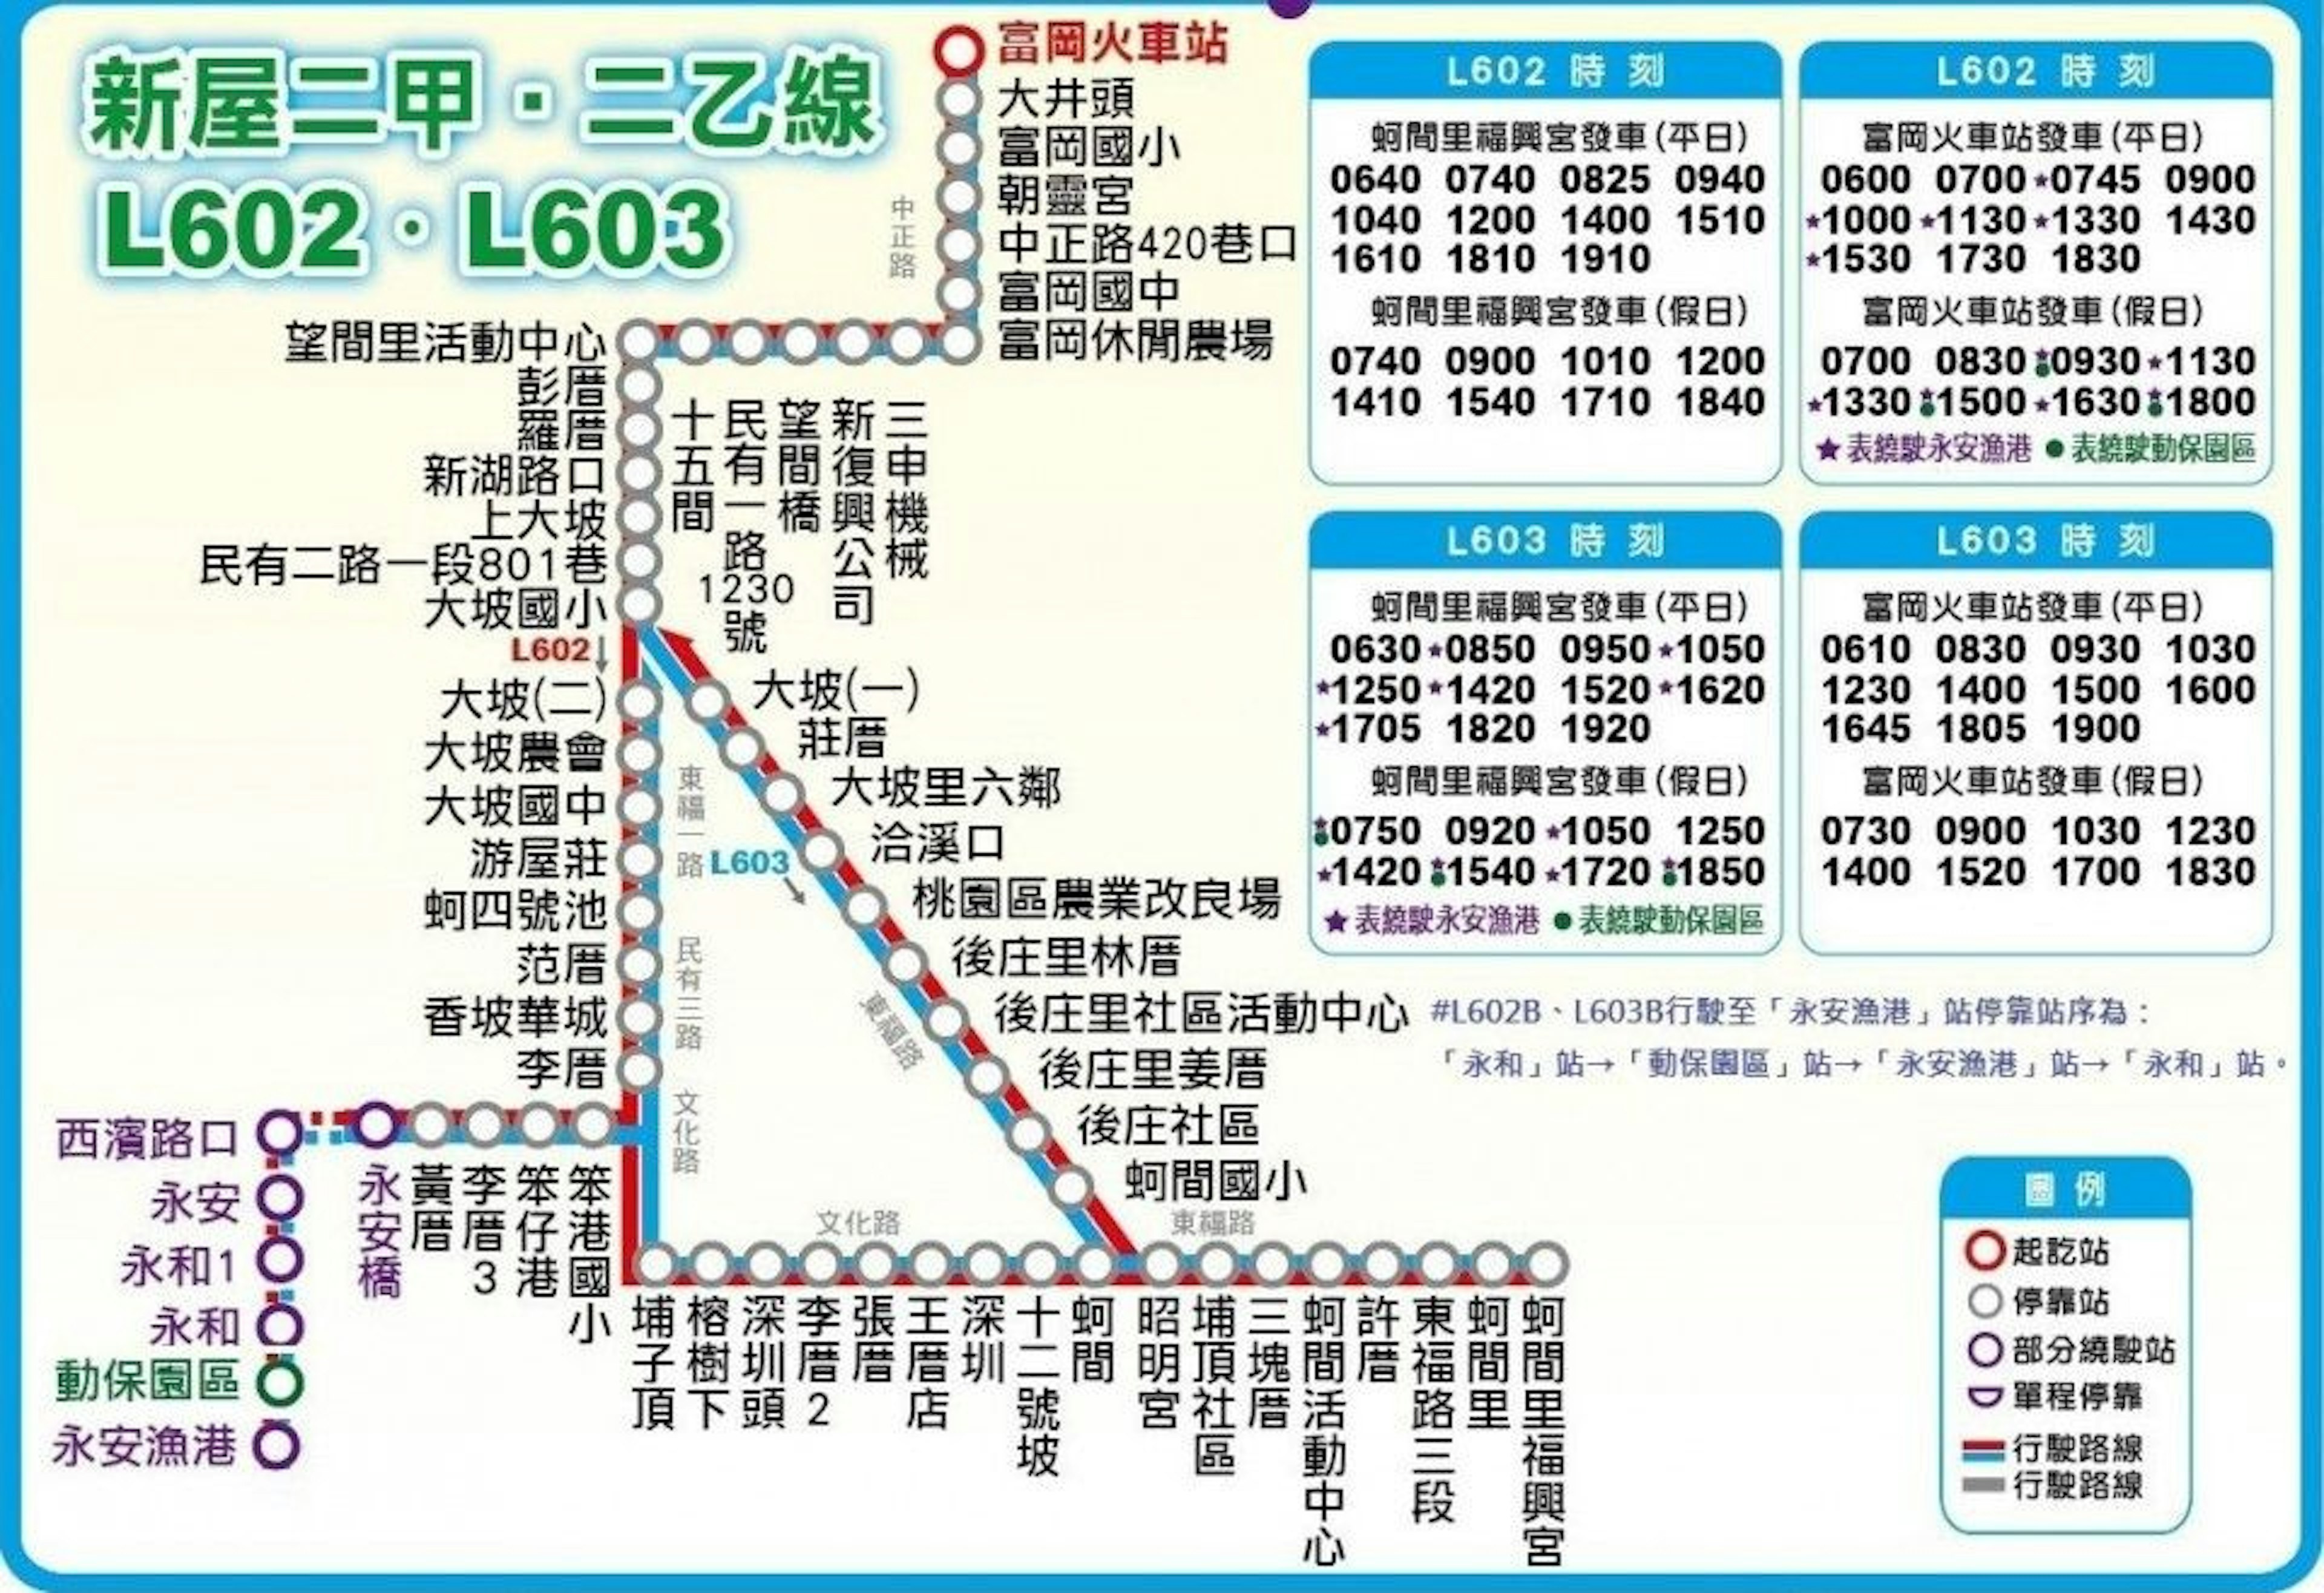 L603Route Map-桃園 Bus